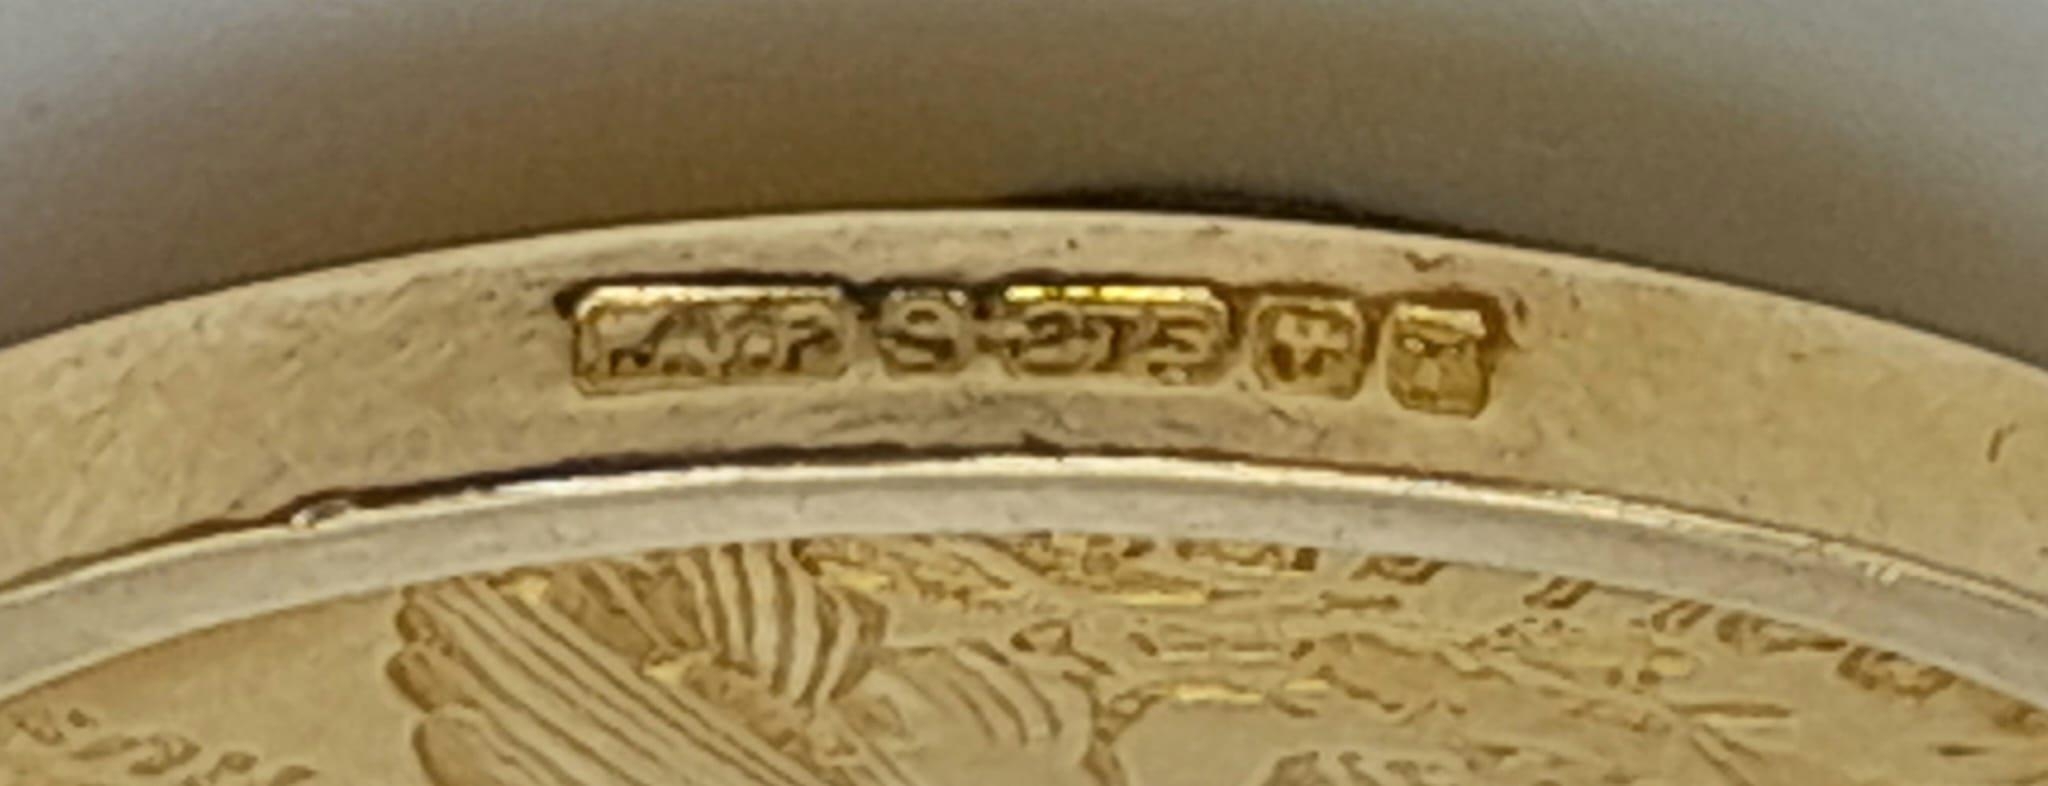 A 22k (900) Gold 1908 USA Two and a Half Dollar Coin in a 9K Gold Setting. 5.13g total weight. - Image 3 of 3